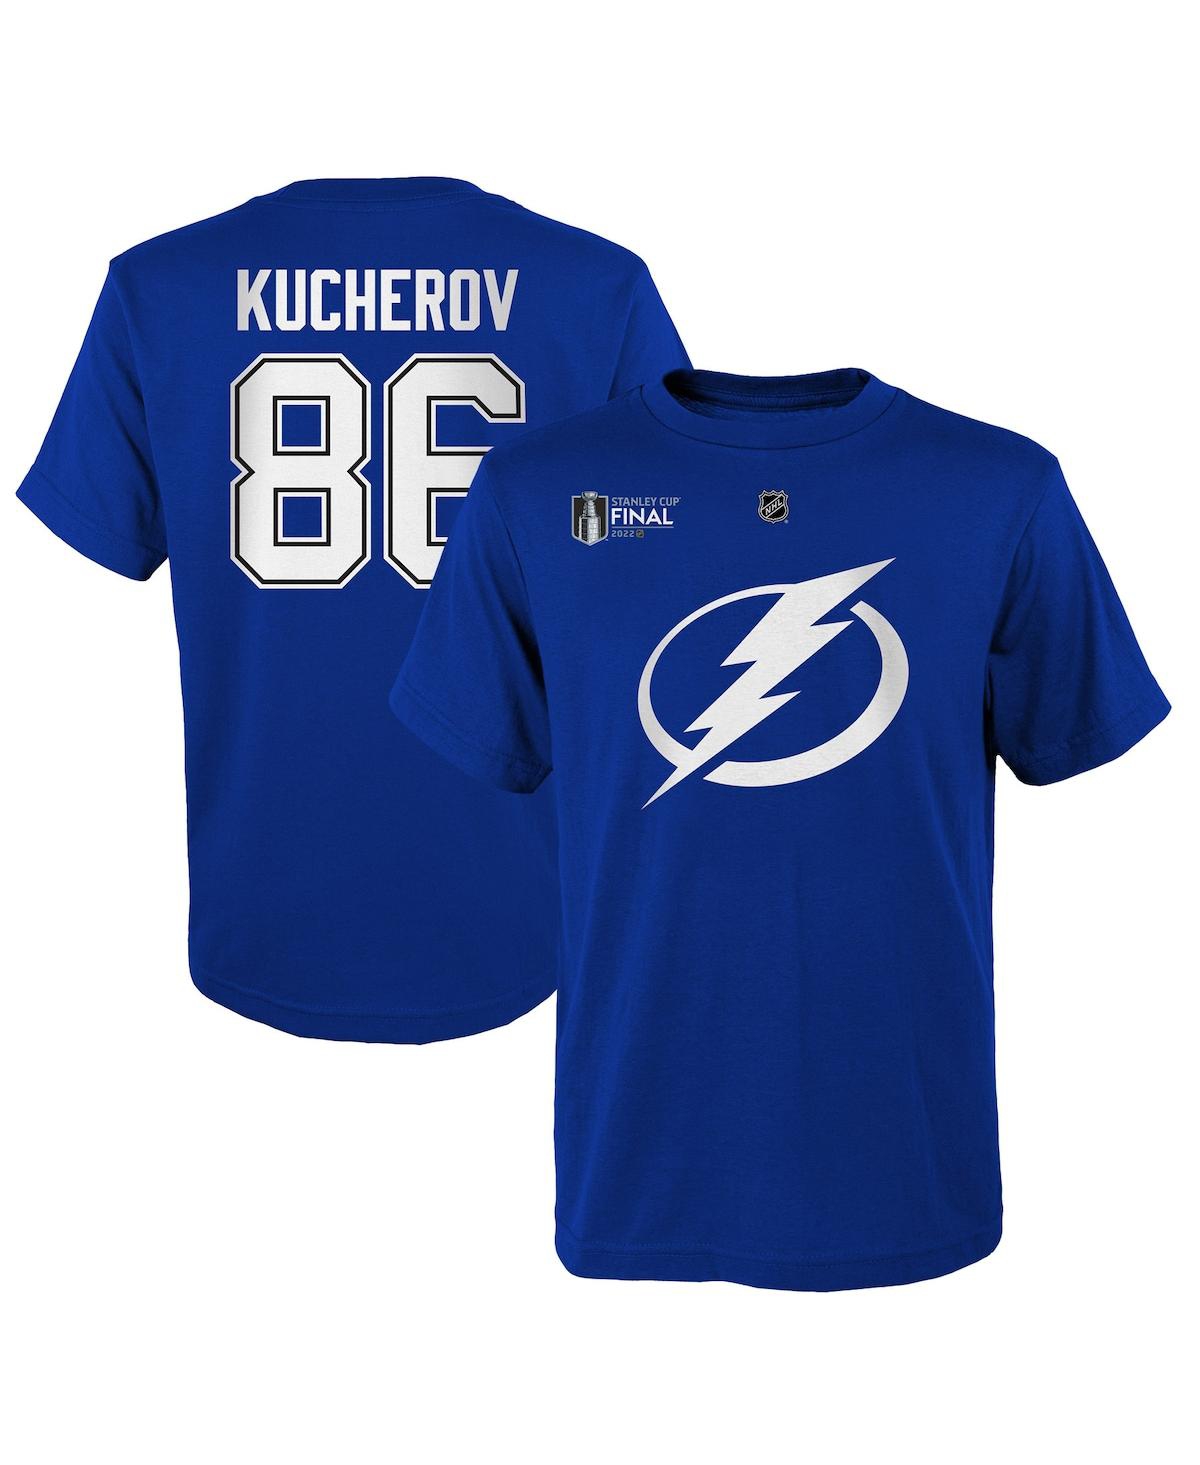 Outerstuff Kids' Big Boys And Girls Nikita Kucherov Blue Tampa Bay Lightning 2022 Stanley Cup Final Name And Number T